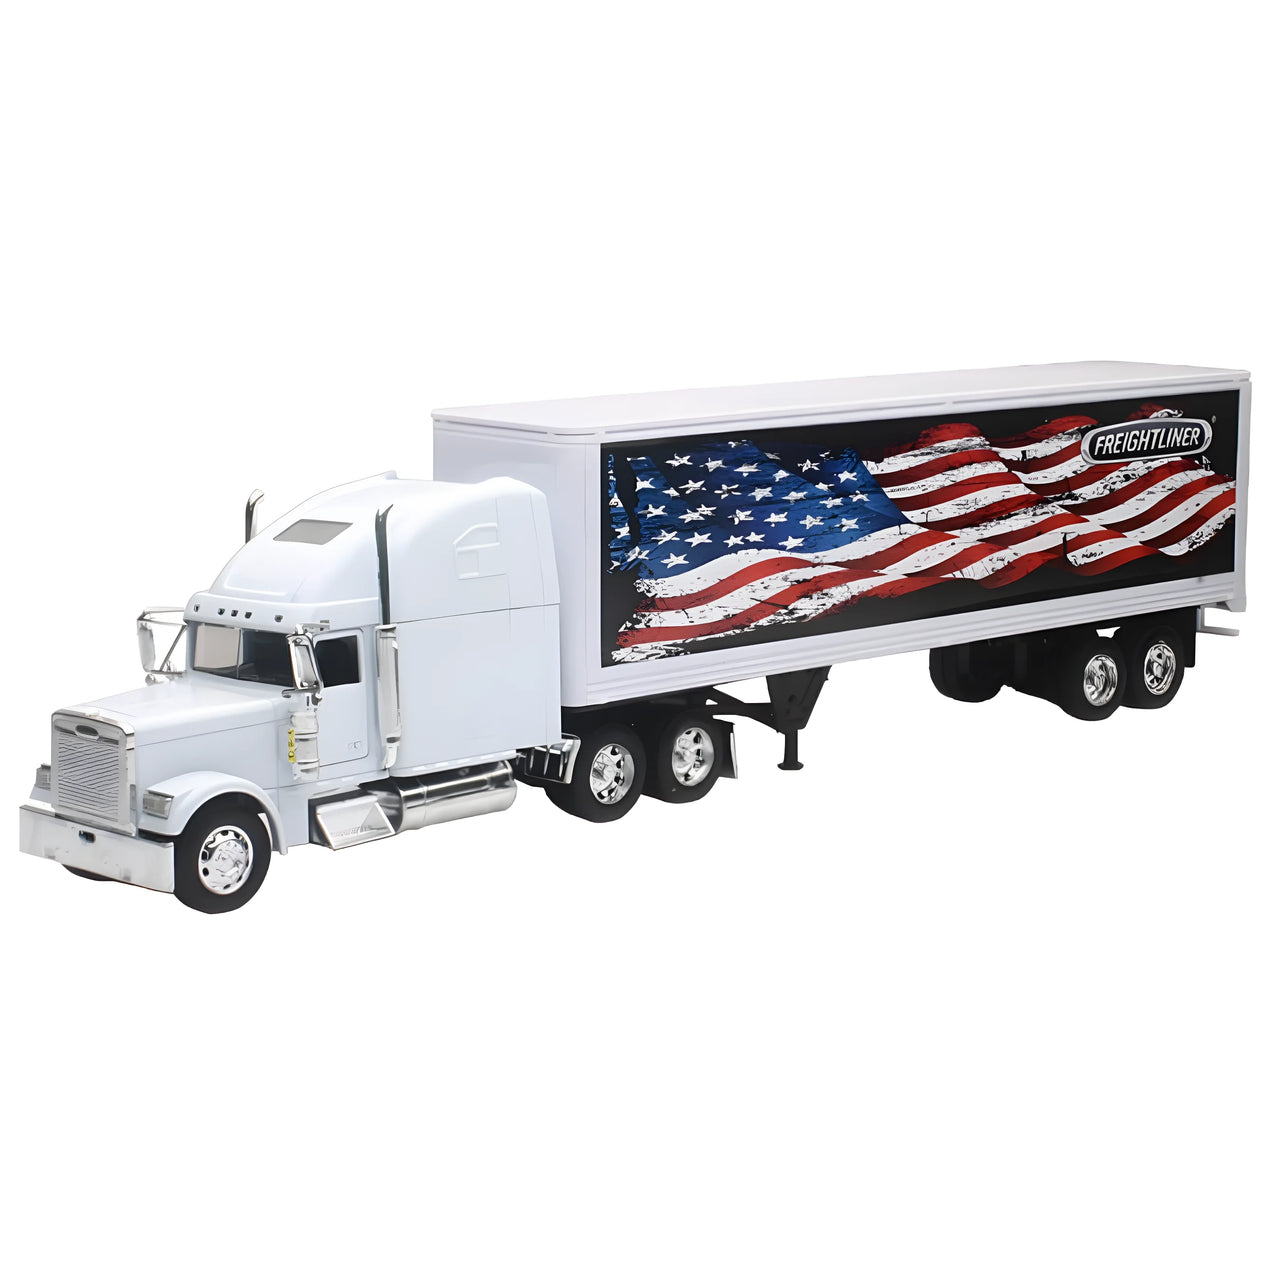 SS-12783E Freightliner Classic XL Trailer Scale 1:32